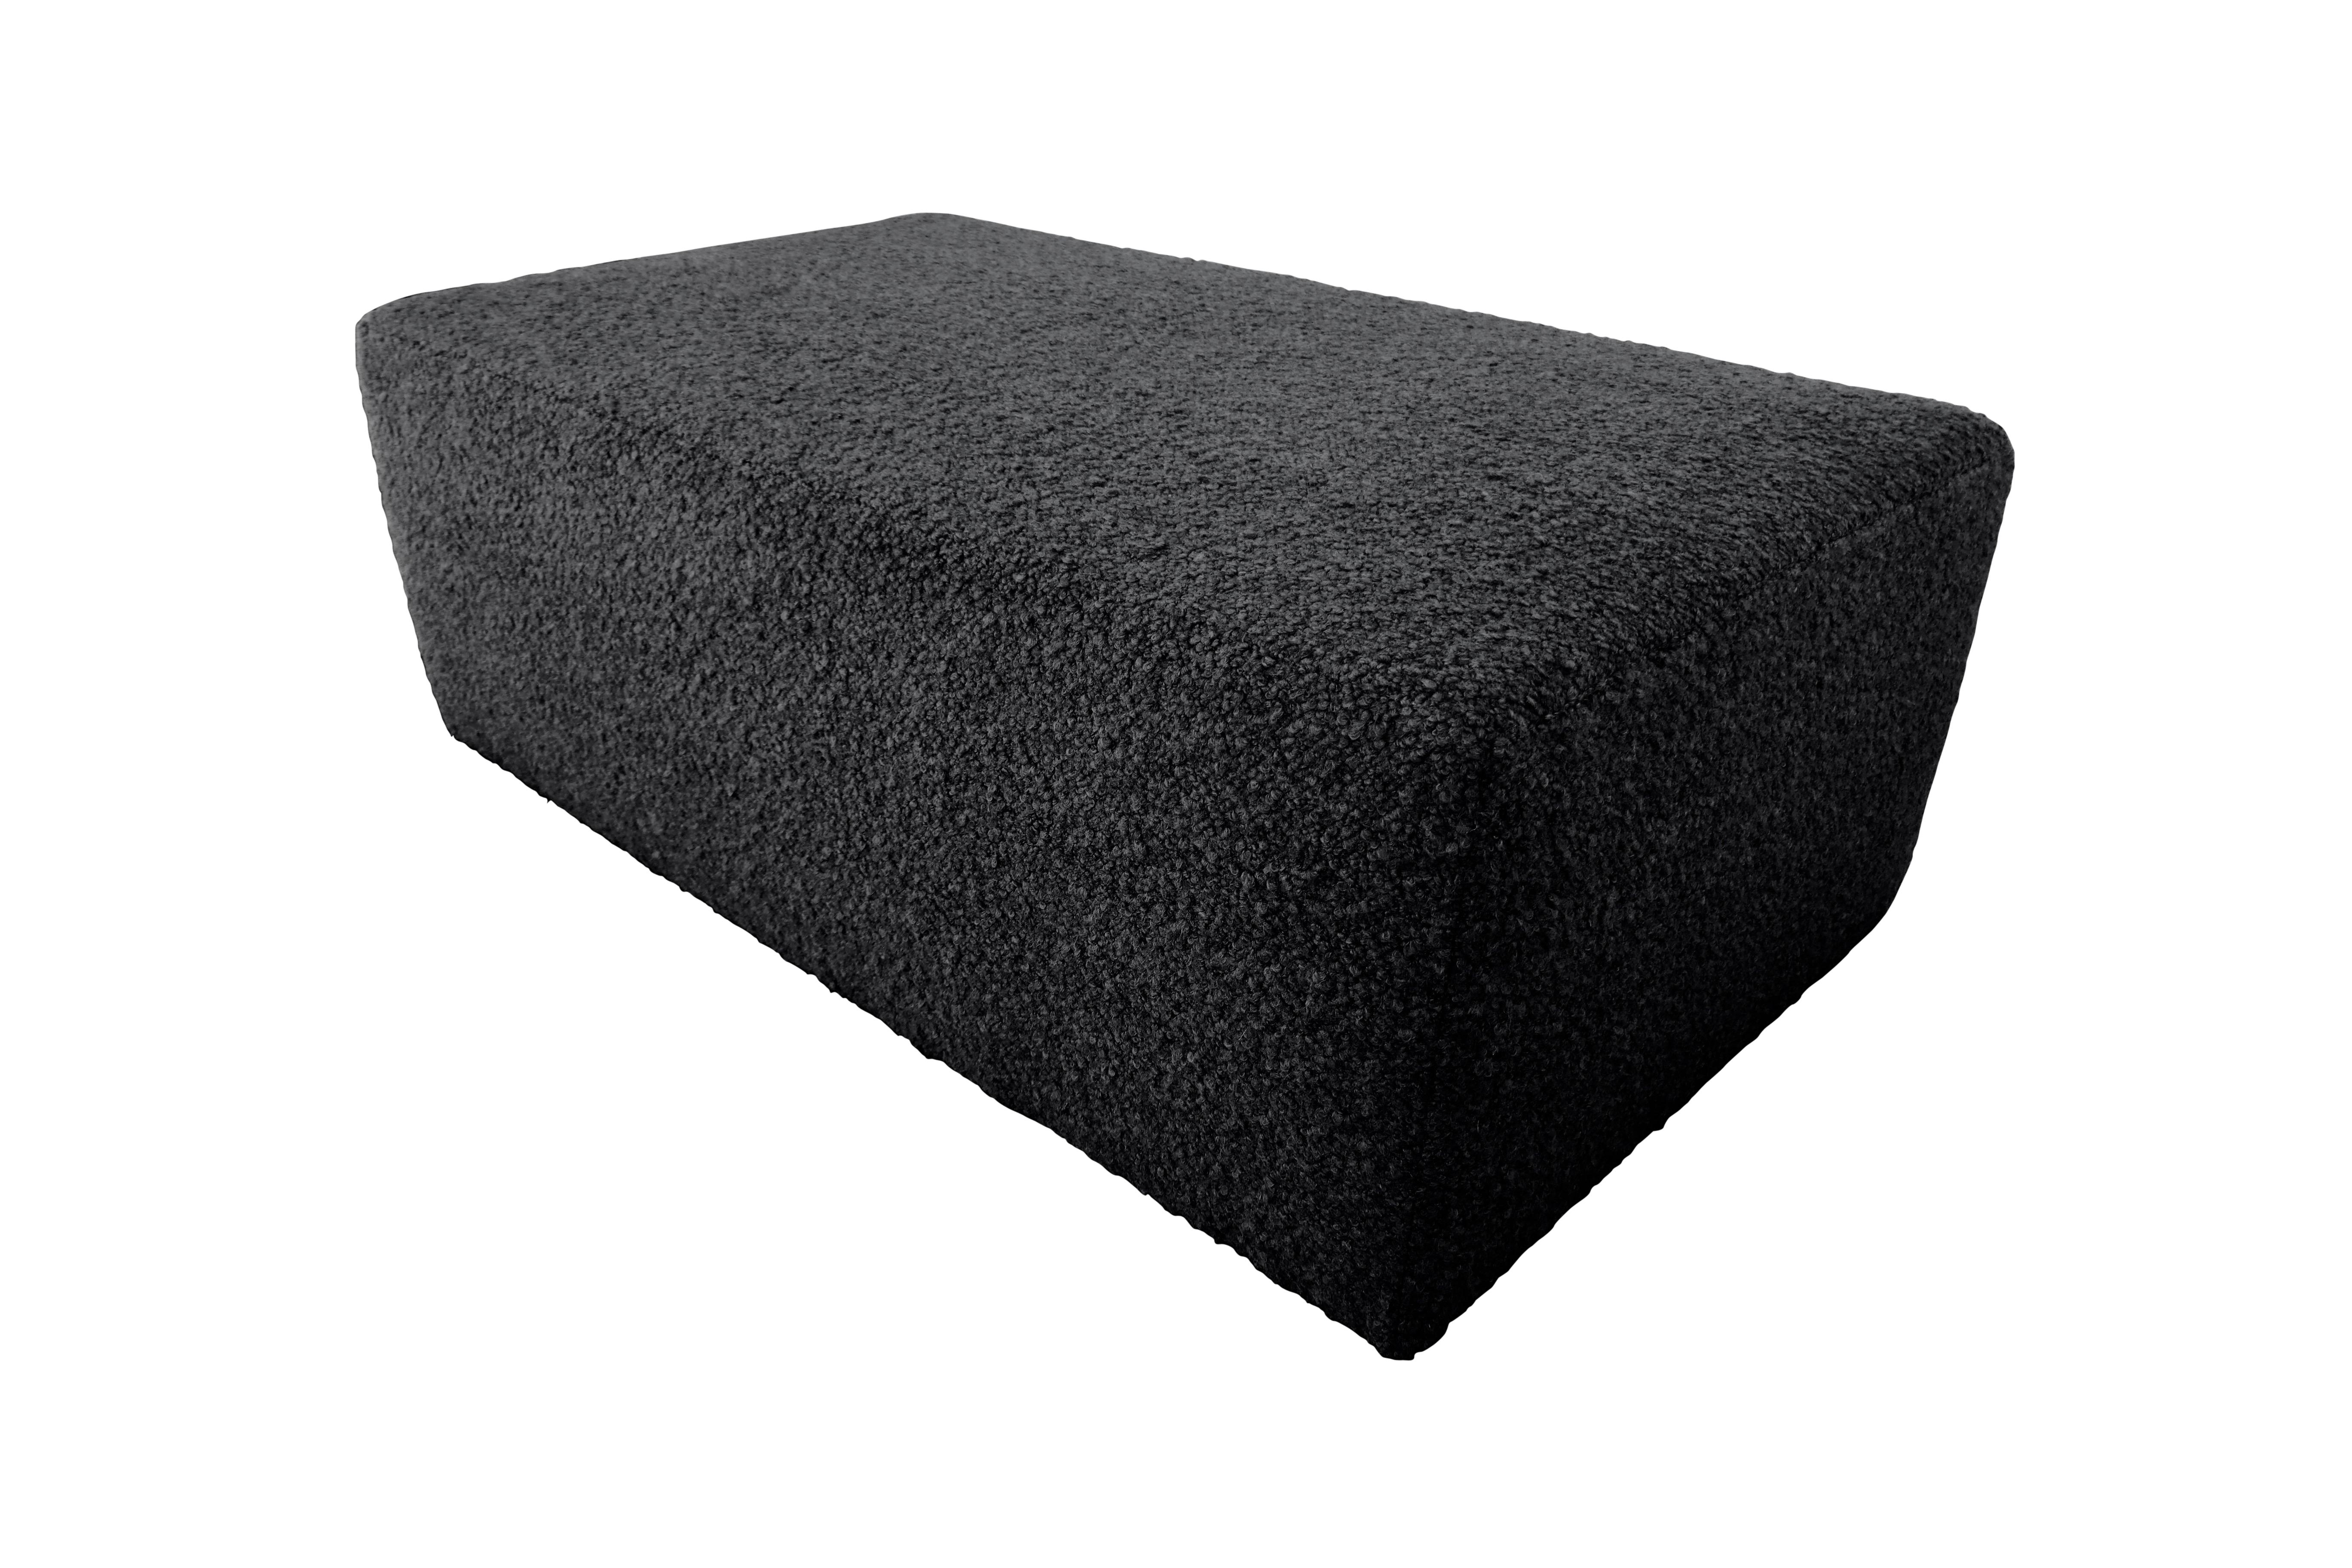 FI custom individually hand-crafted premium ottoman collection. Created from ultra-luxe silky soft textural shearling textile, shown in Obsidian Black color way. Fully cushioned, solid wood inner-frame, superb quality. All soft and safe edges and